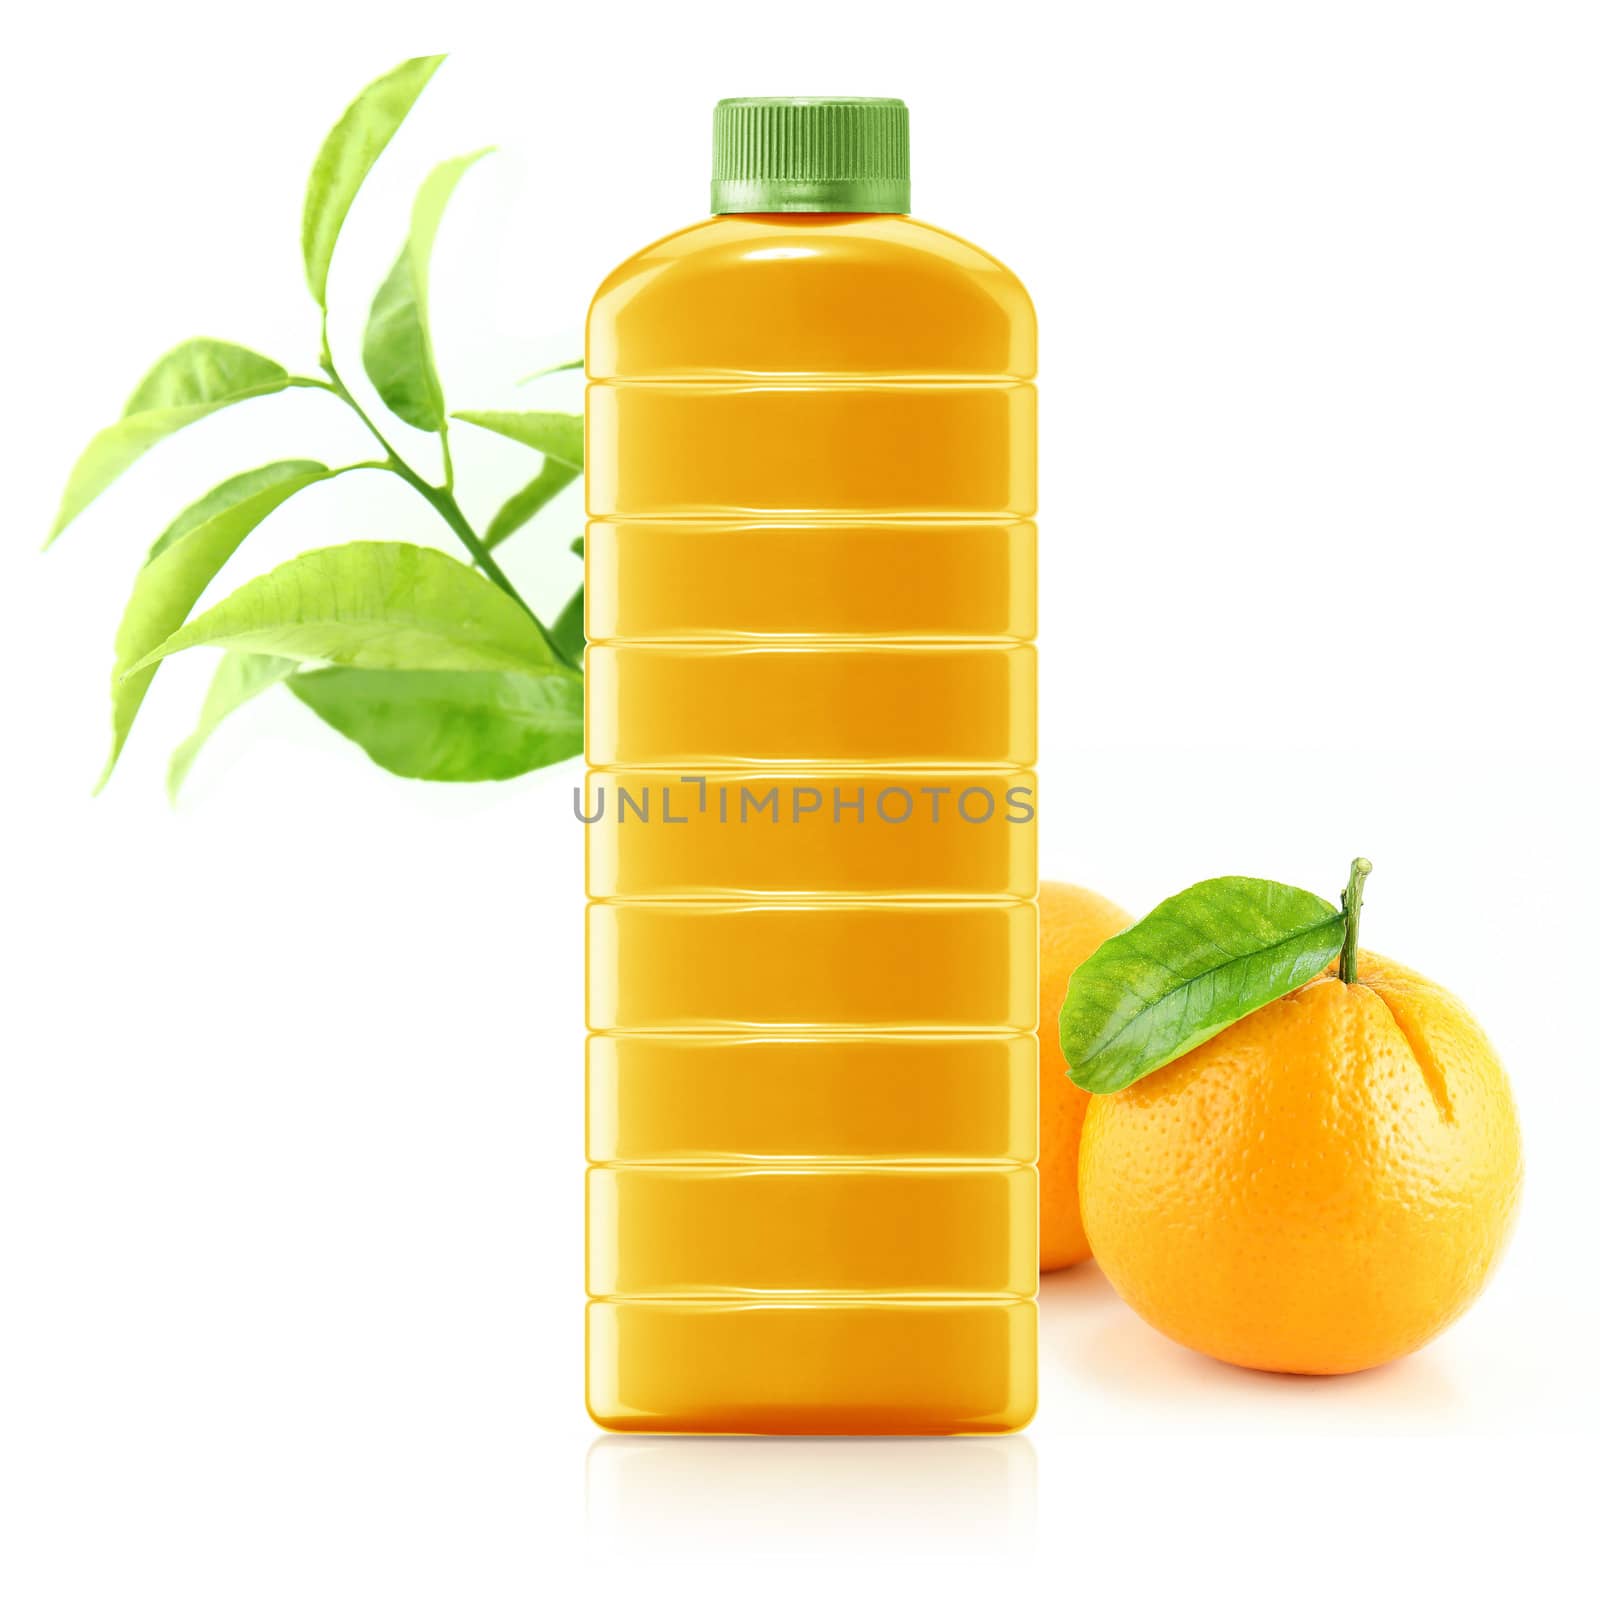 Orange juice in a plastic container jug with fresh orange and leaves on a white background.